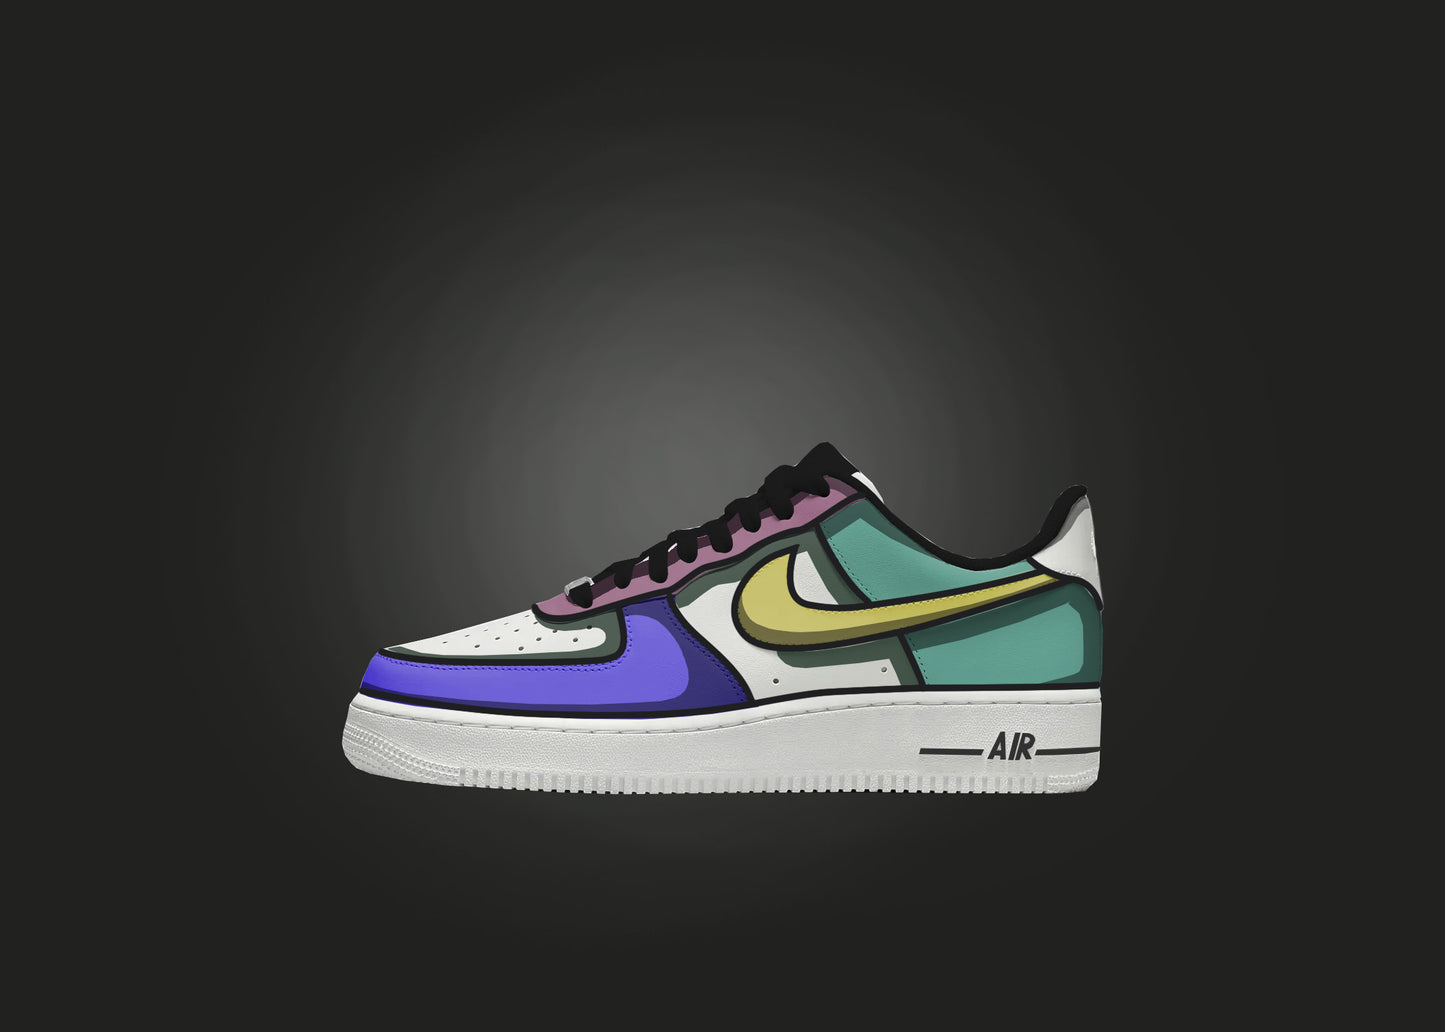 Custom Air Force 1 sneaker with panels of purple, pink, yellow, and green, set against a black background.